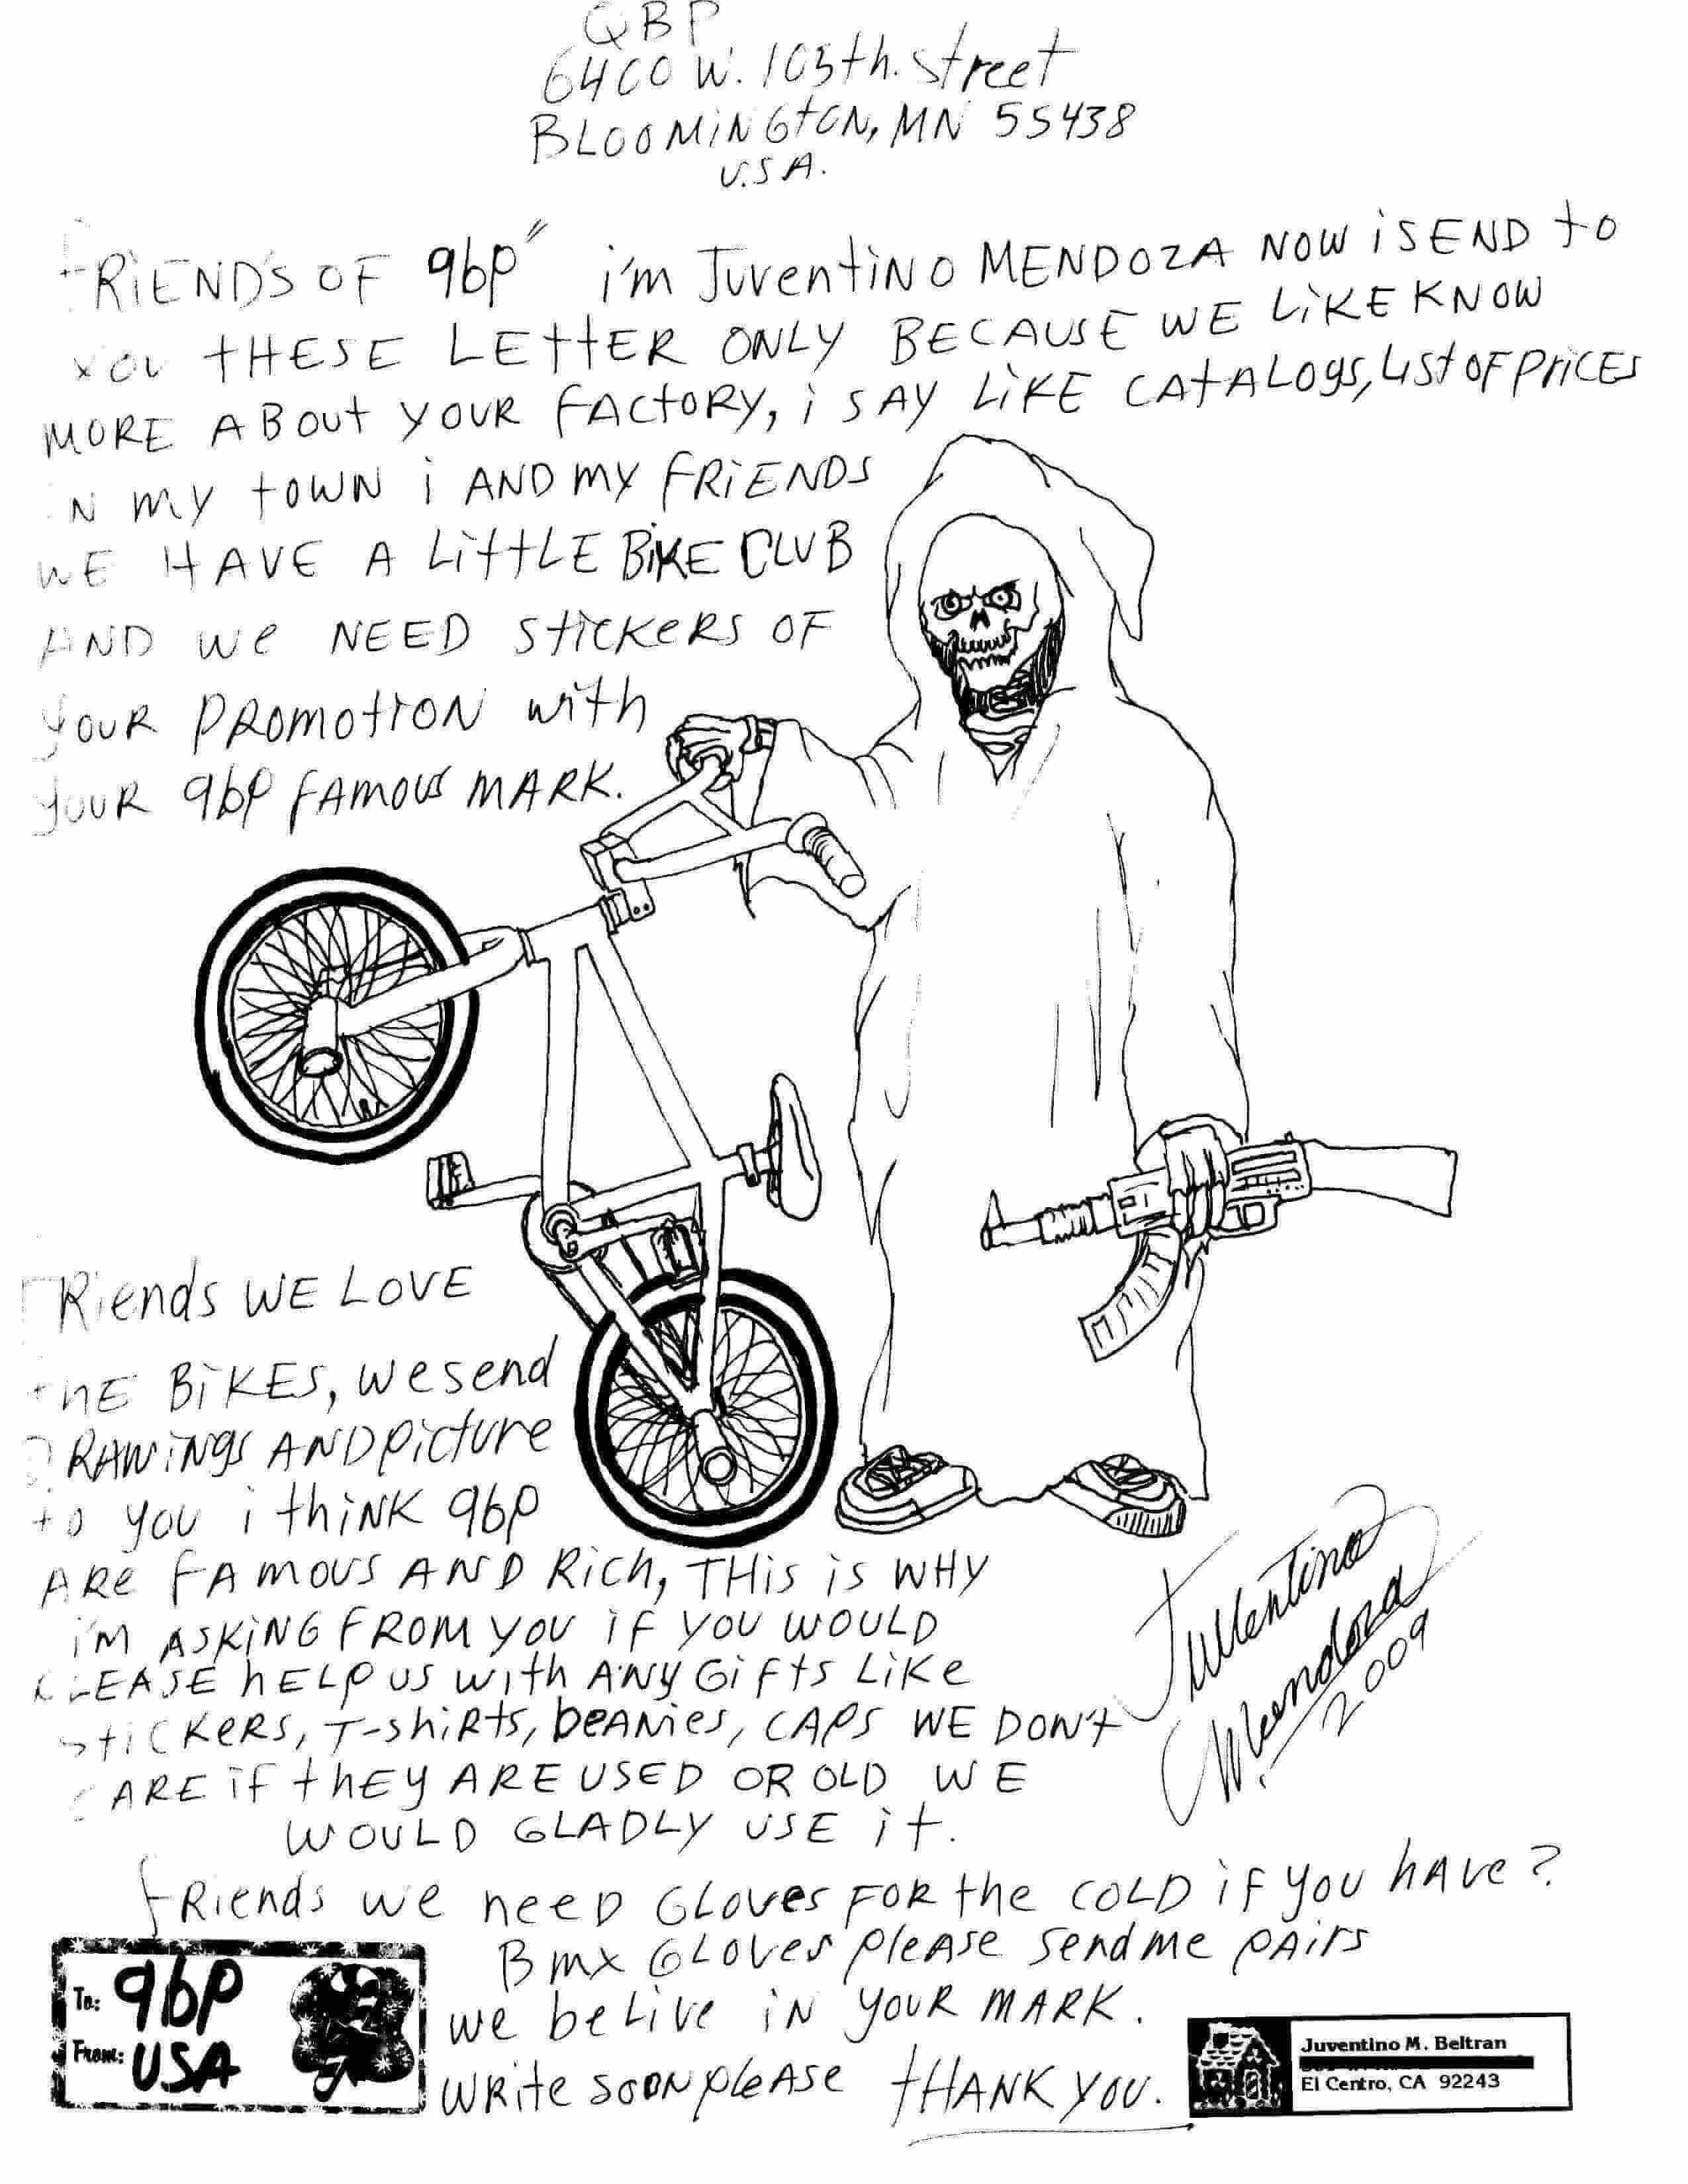 Handwritten letter, in black ink with a drawing of a grim reaper holding a bike and a rifle, on white paper